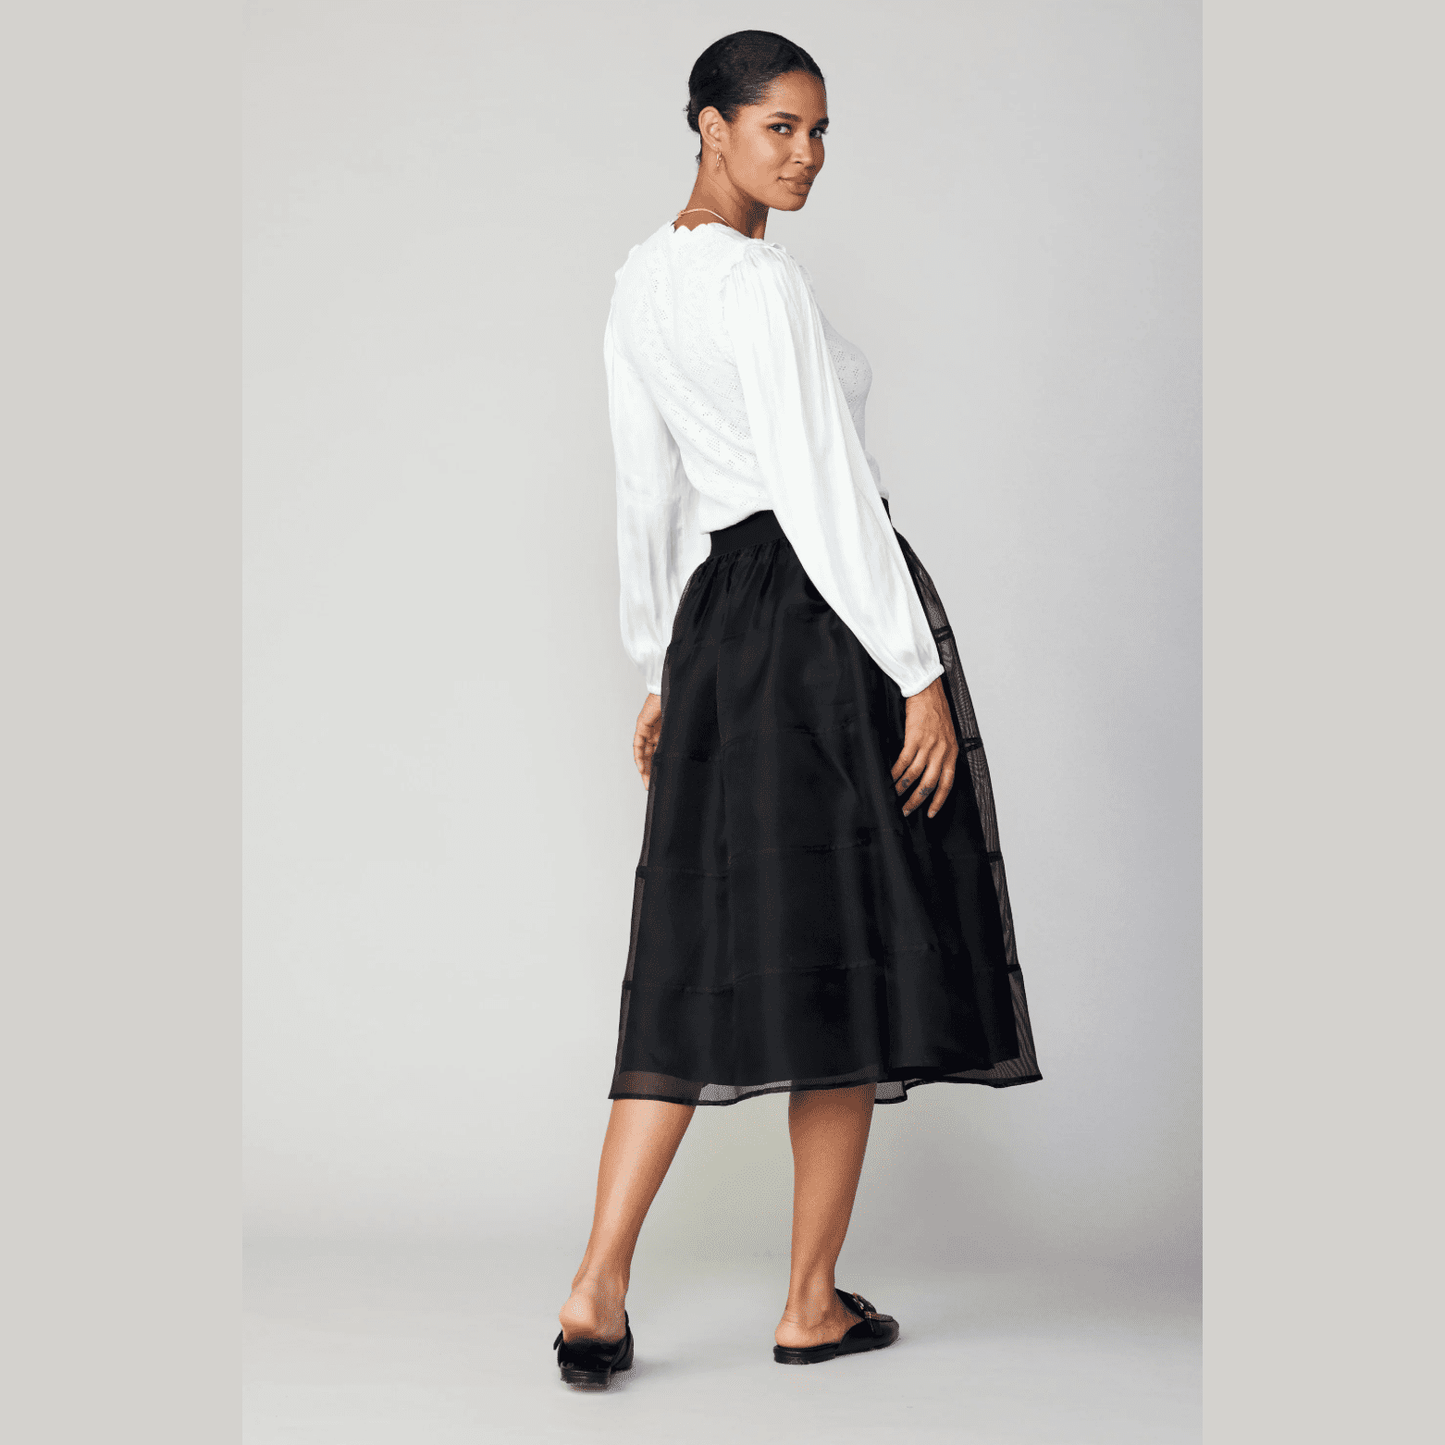 Current Air Lined Organza Skirt in Black - Jaunts Boutique 